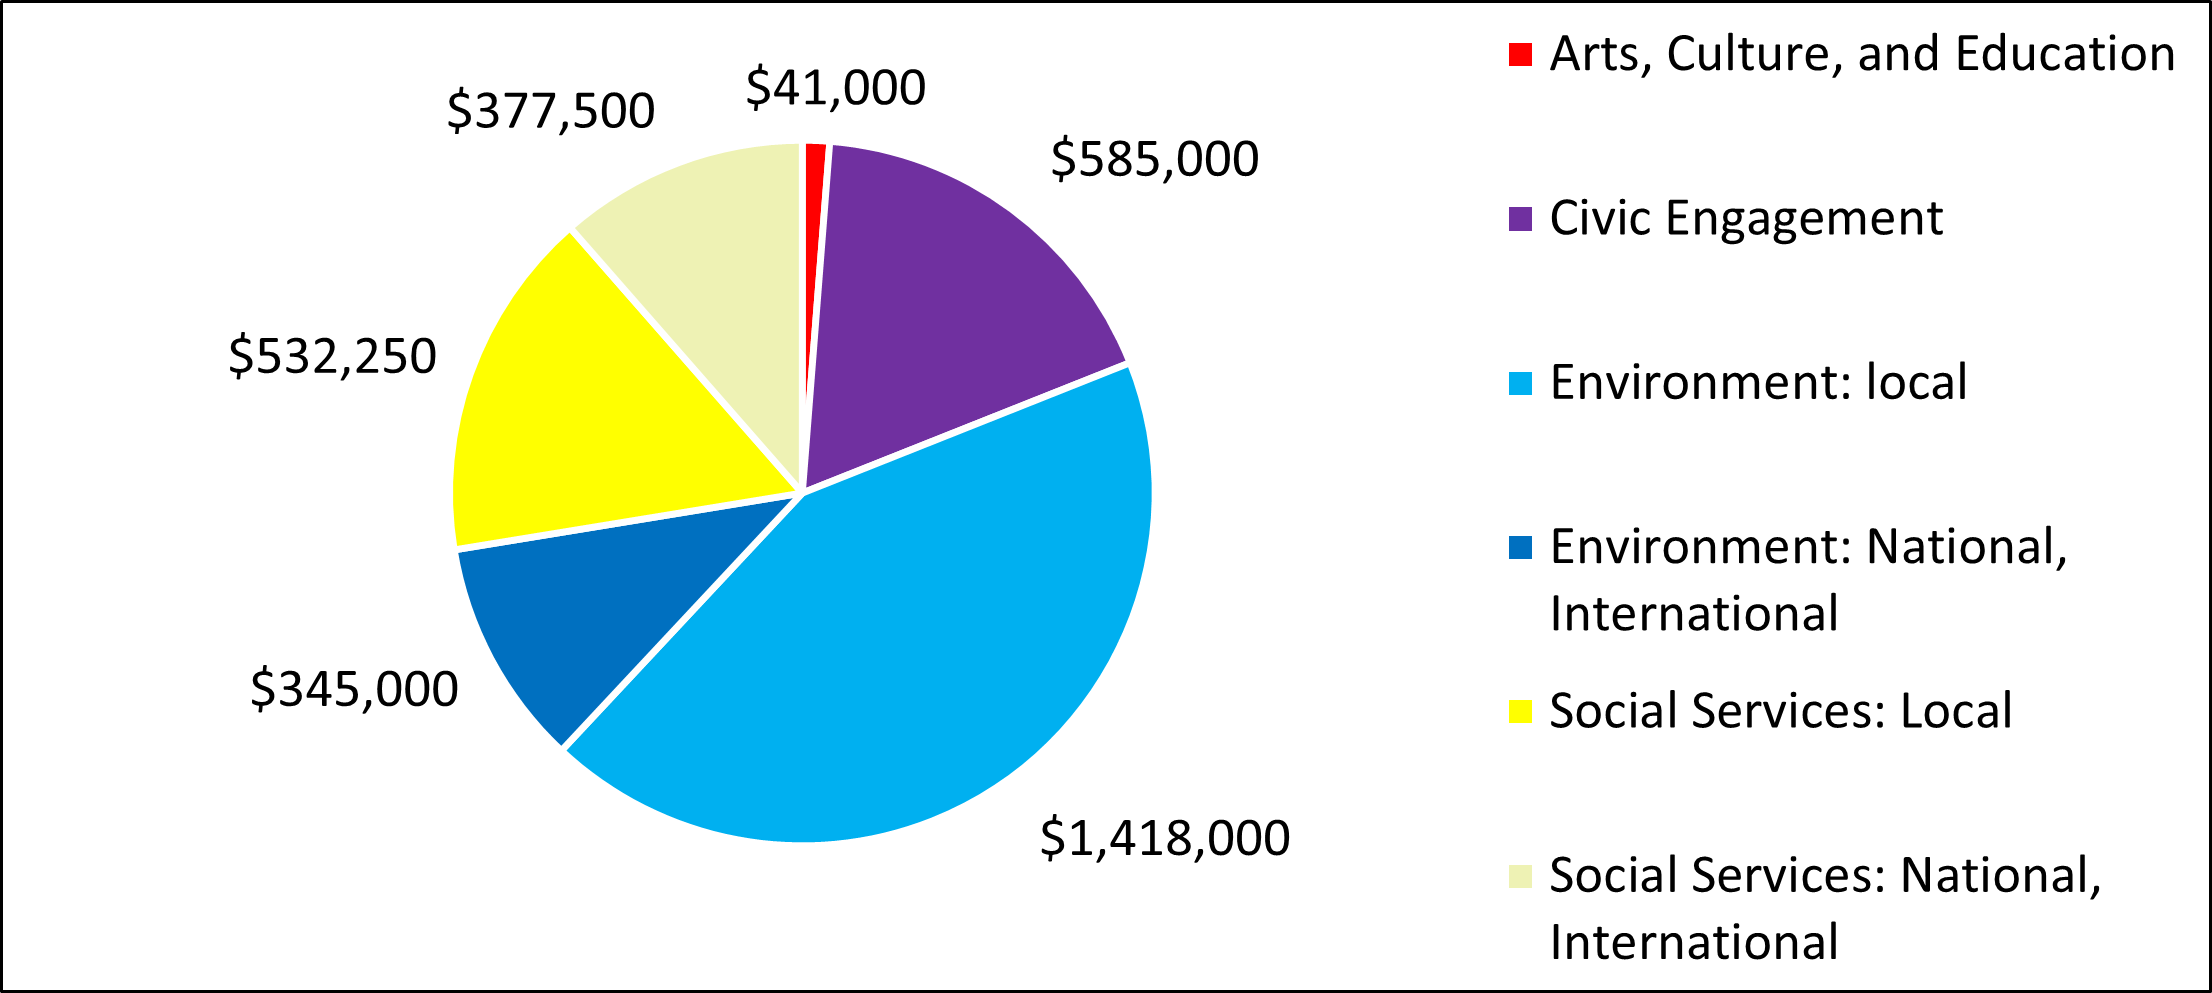 Pie chart showing distribution of Agua grants across categories - Arts, Culture, and Education	 $41,000  Civic Engagement	 $585,000  Environment: local	 $1,418,000  Environment: National, International 	 $345,000  Social Services: Local	 $532,250  Social Services: National, International	 $377,500 